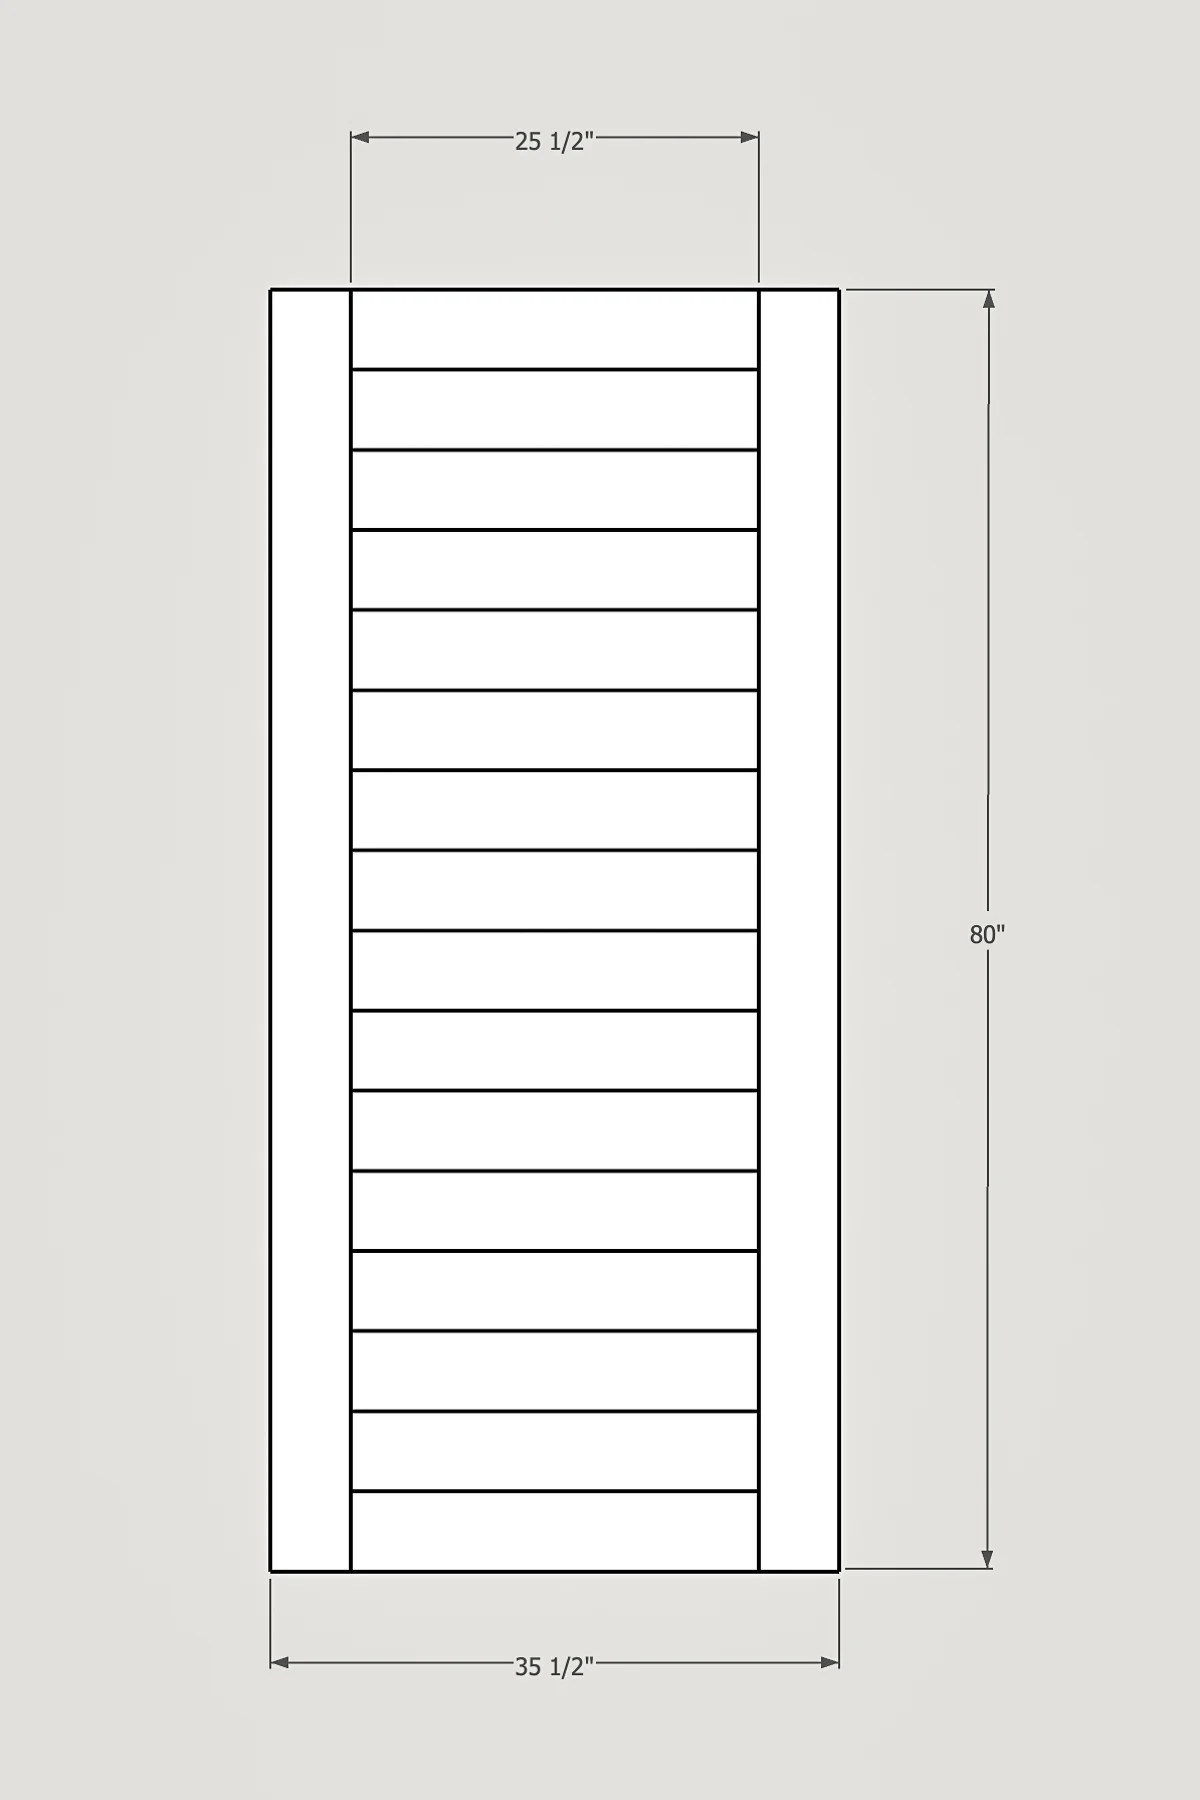 sketchup model of shed door with dimensions